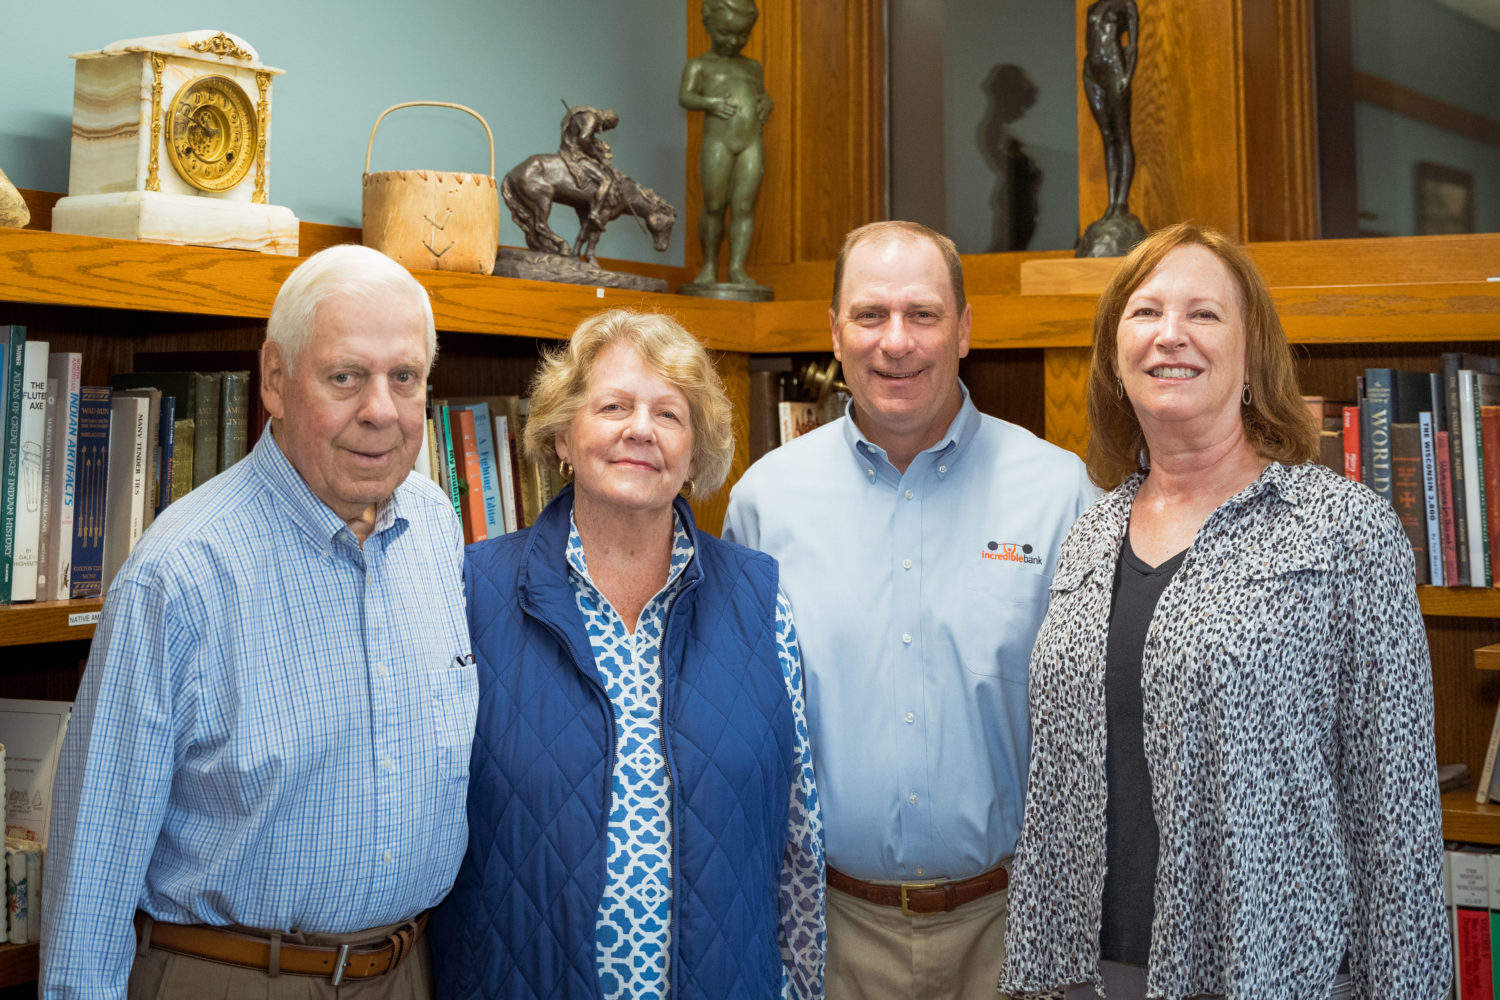 Nicklaus Family donates $34,000 to Merrill Historical Society for digitizing project